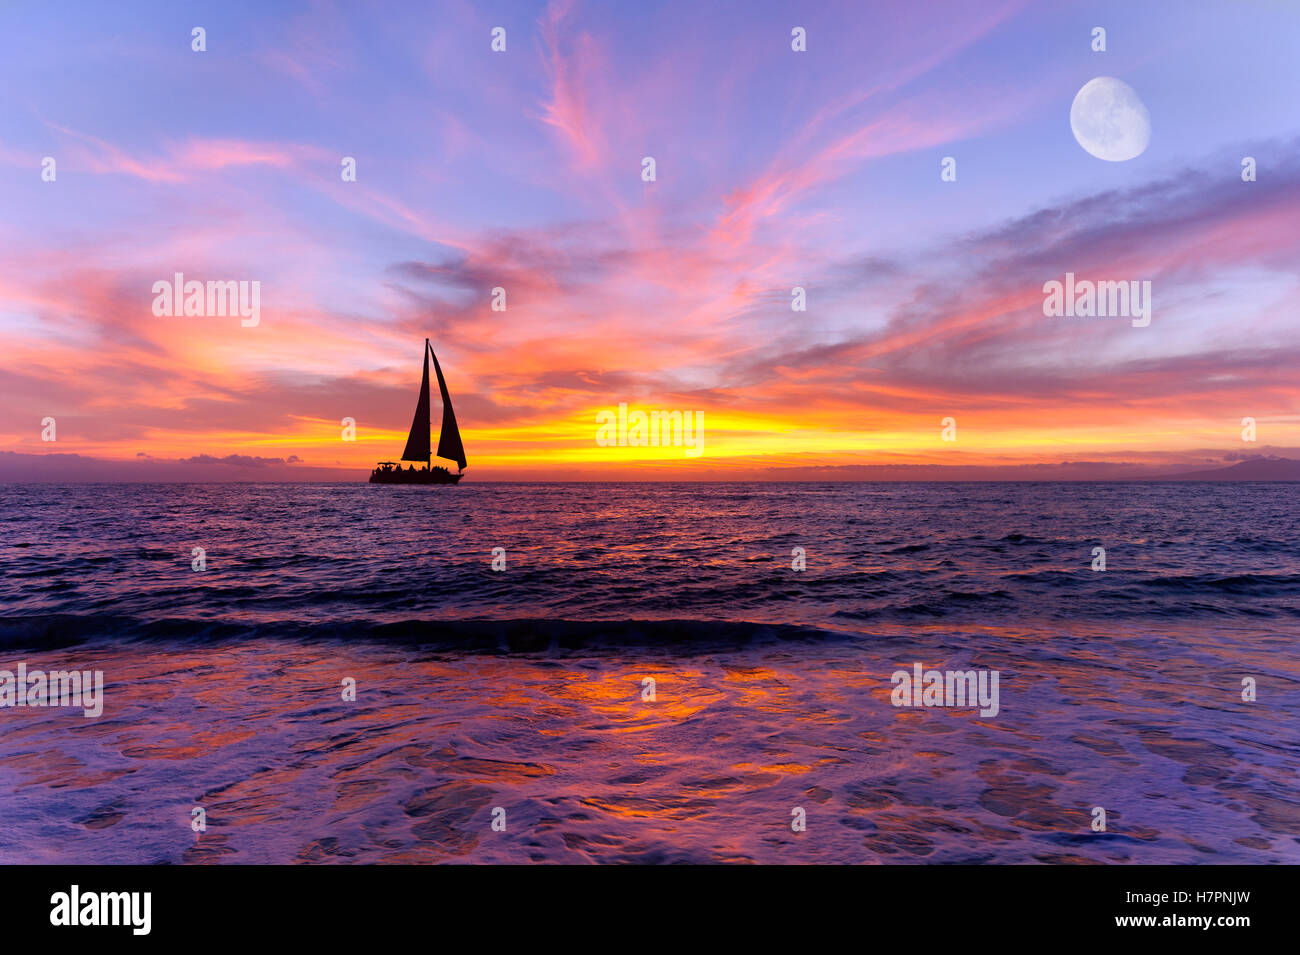 Sailboat ocean sunset is a silhouette of a sailboay sailing along the ocean water with a colorful vivid sunset sky and the moon Stock Photo